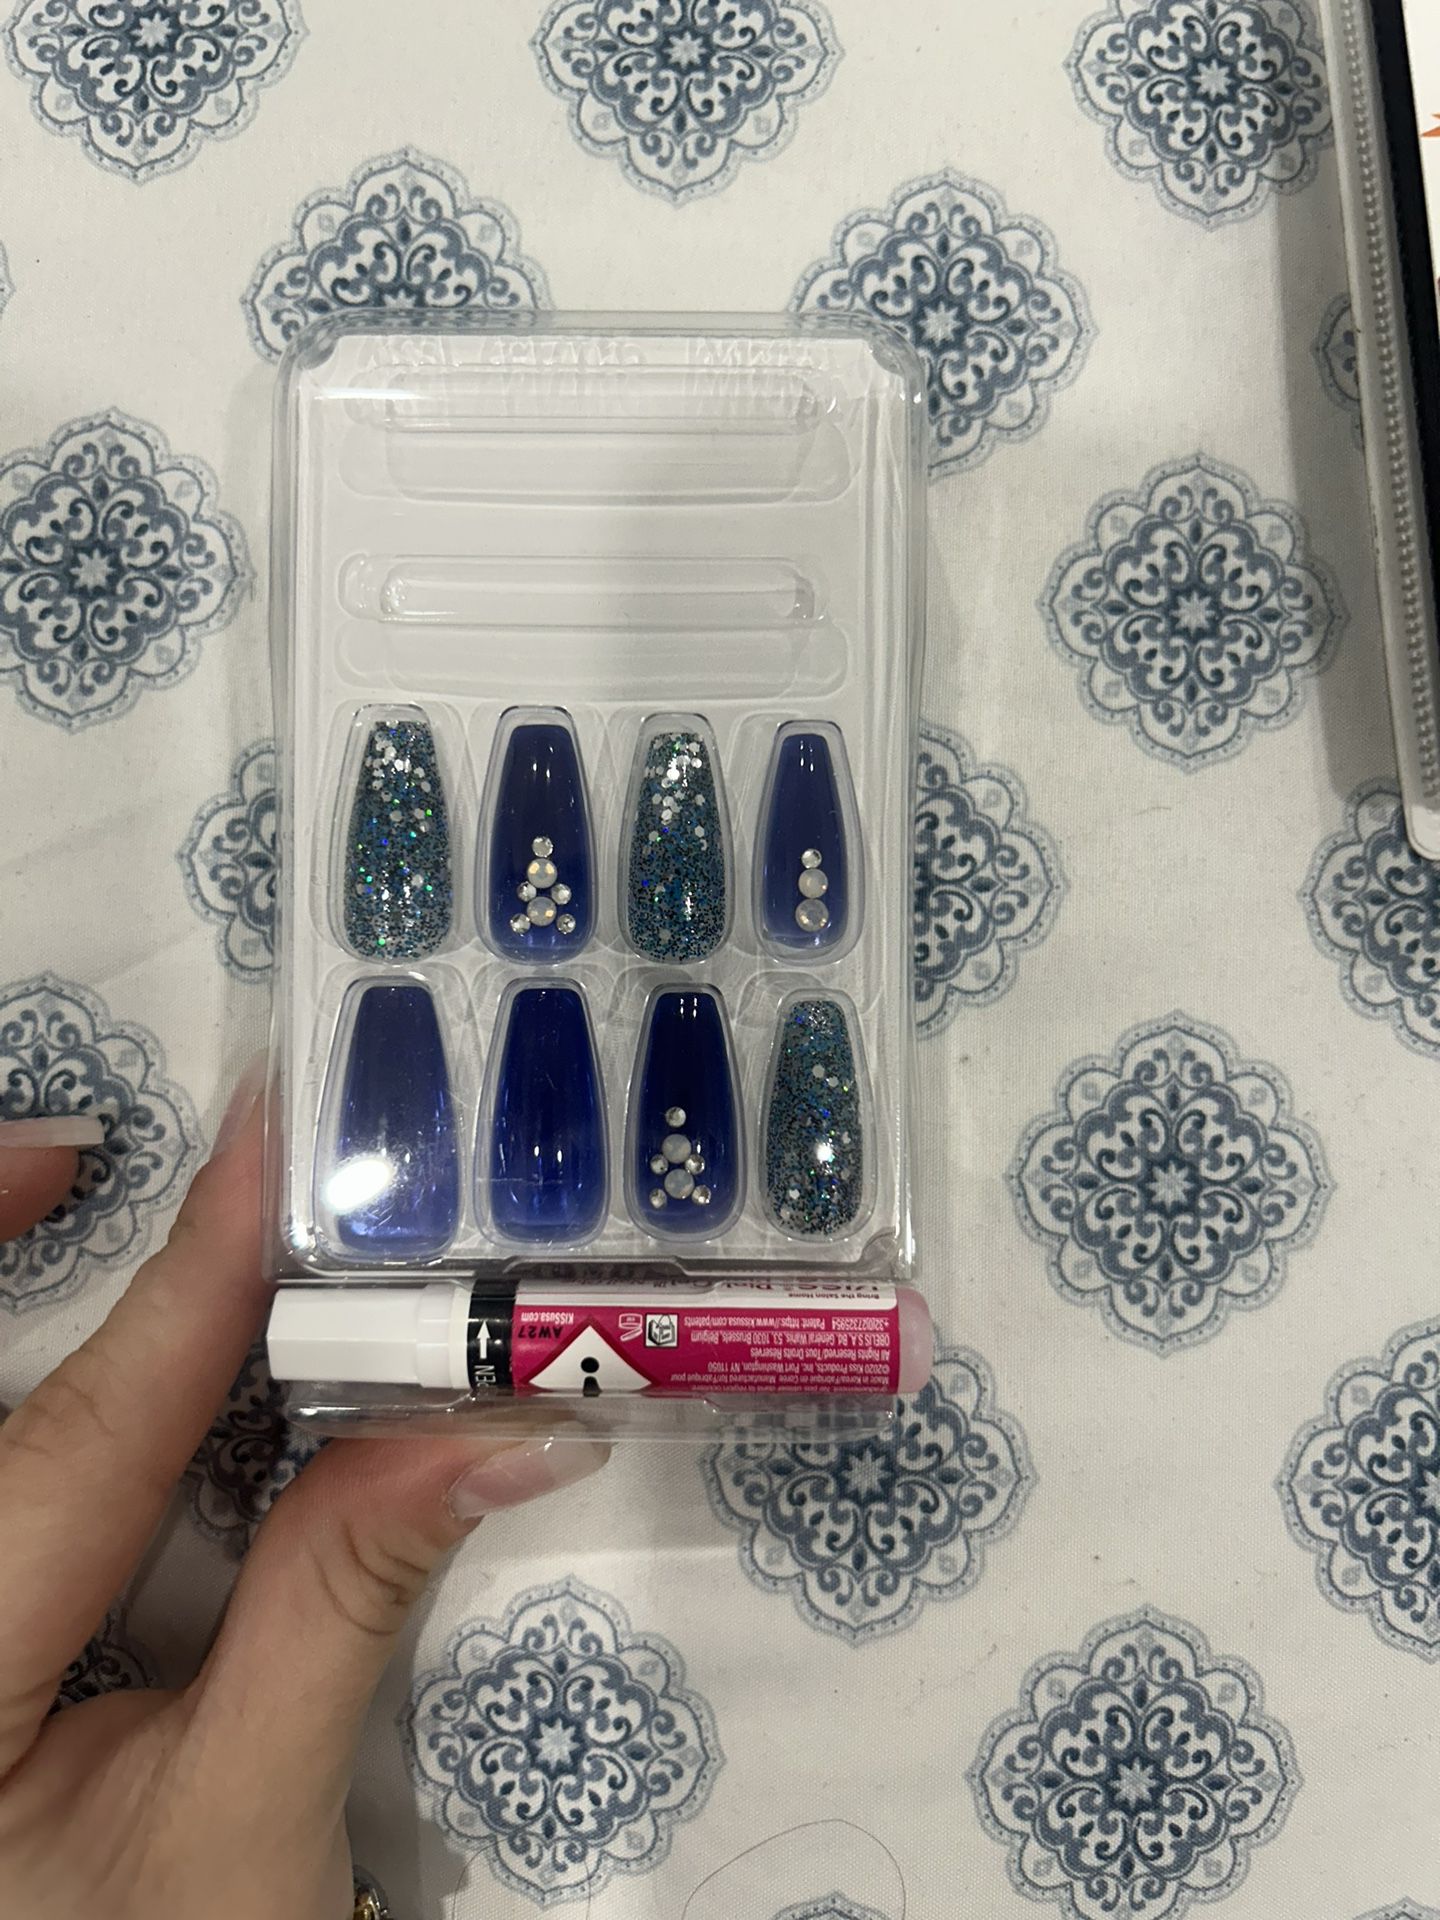 kiss press on jelly nails. unused but box was broken